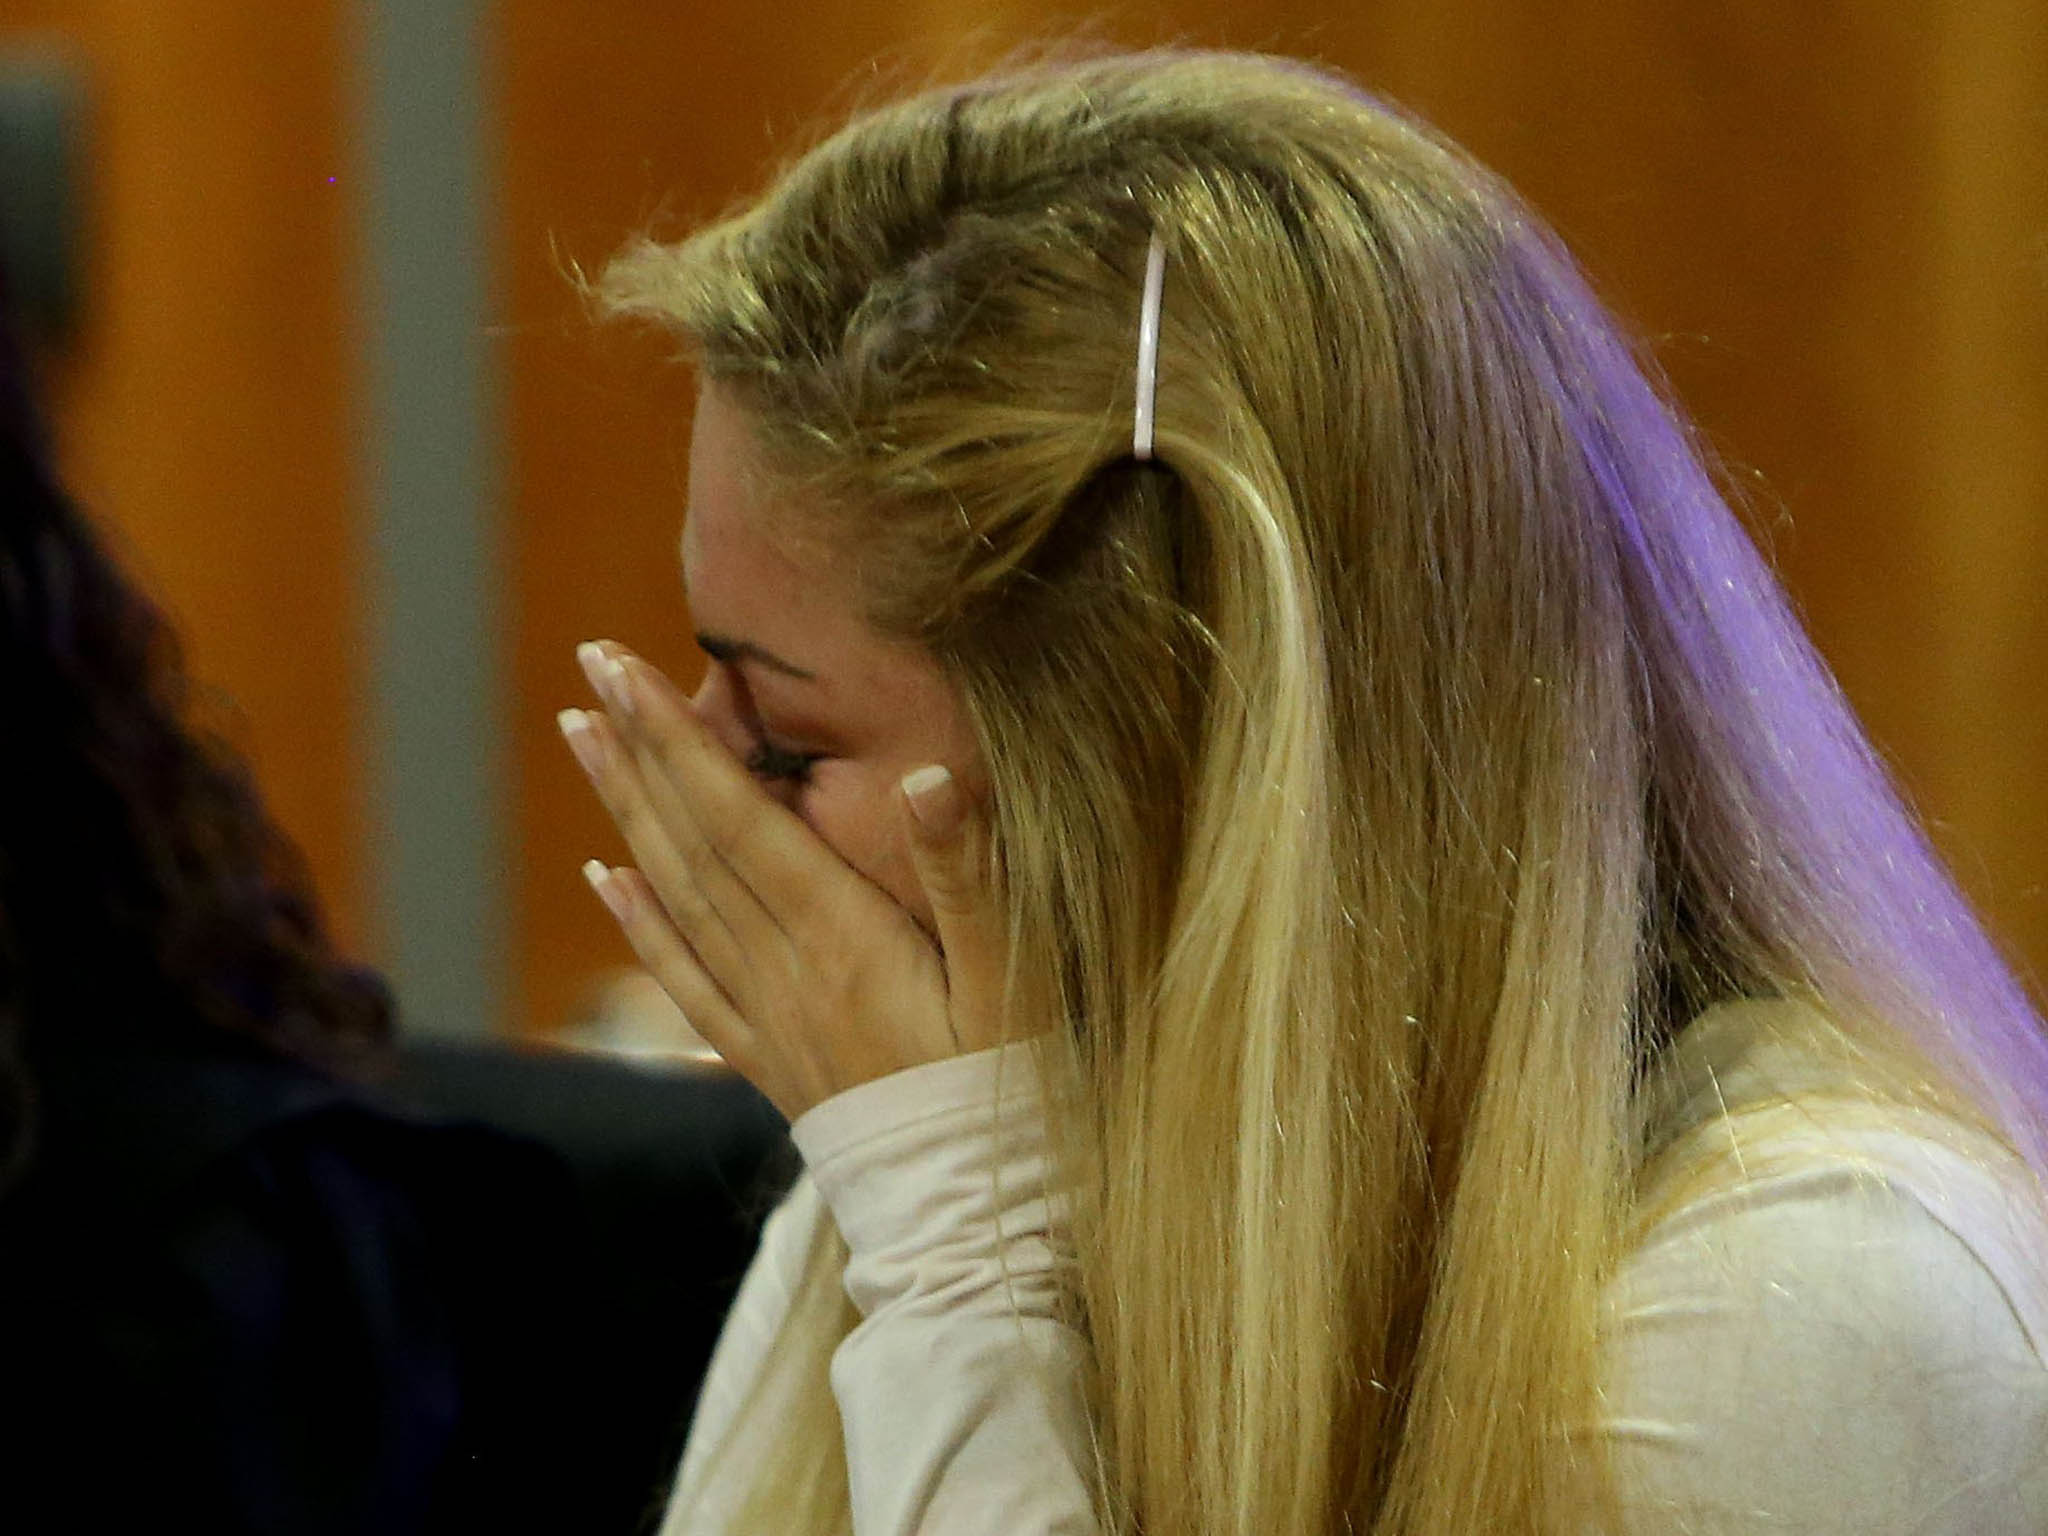 Mayka Marica Kukucova wipes her face as she appears in court in Malaga, Spain